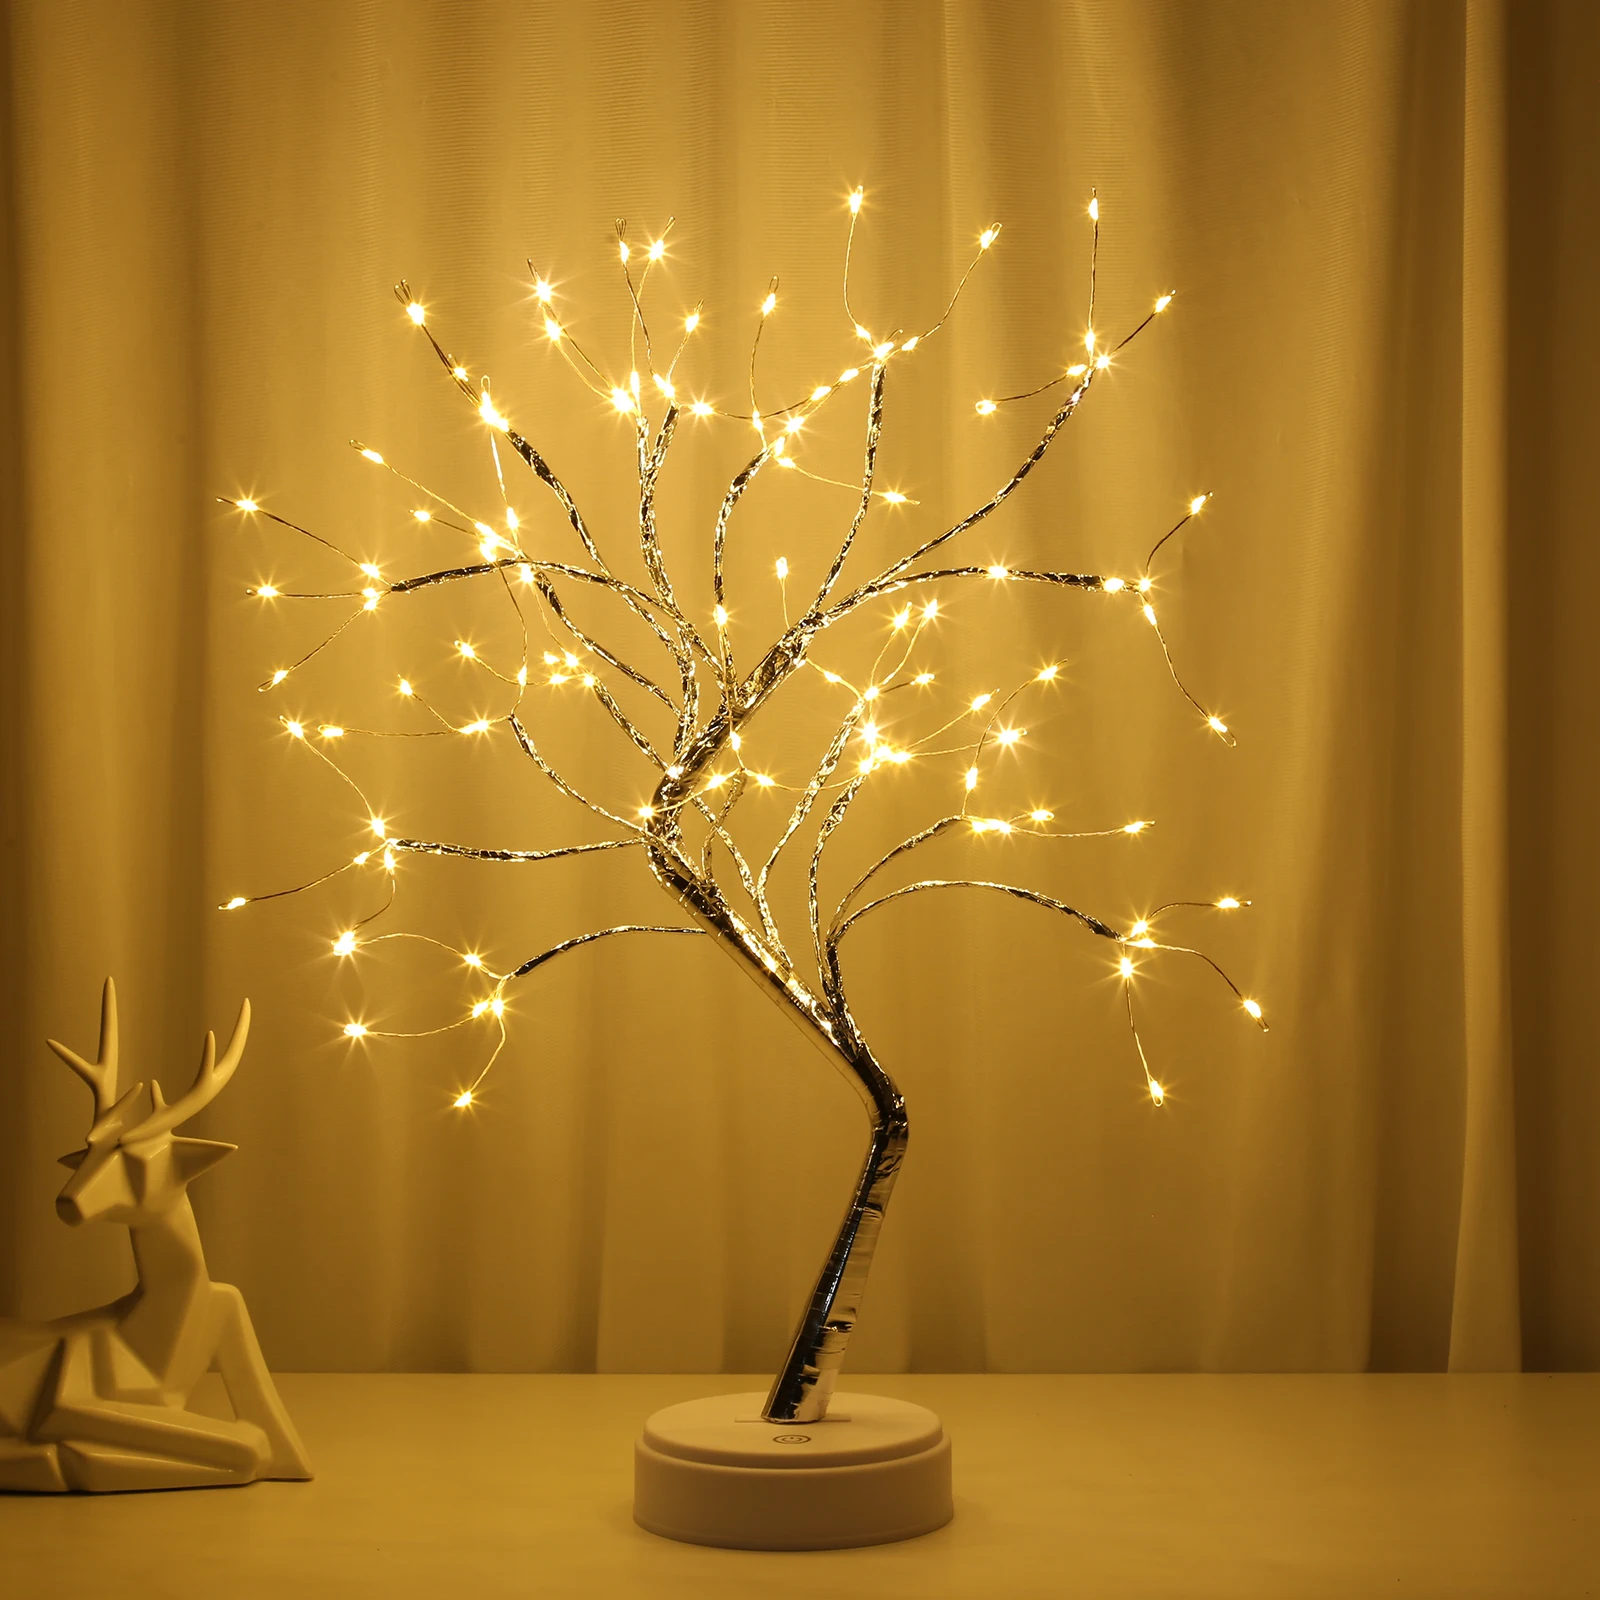 

20 inch Tabletop Bonsai Tree Light 108 LED Christmas Tree Copper Wire Branch Light Home Bedroom Decor Garland Fairy Table Lamp